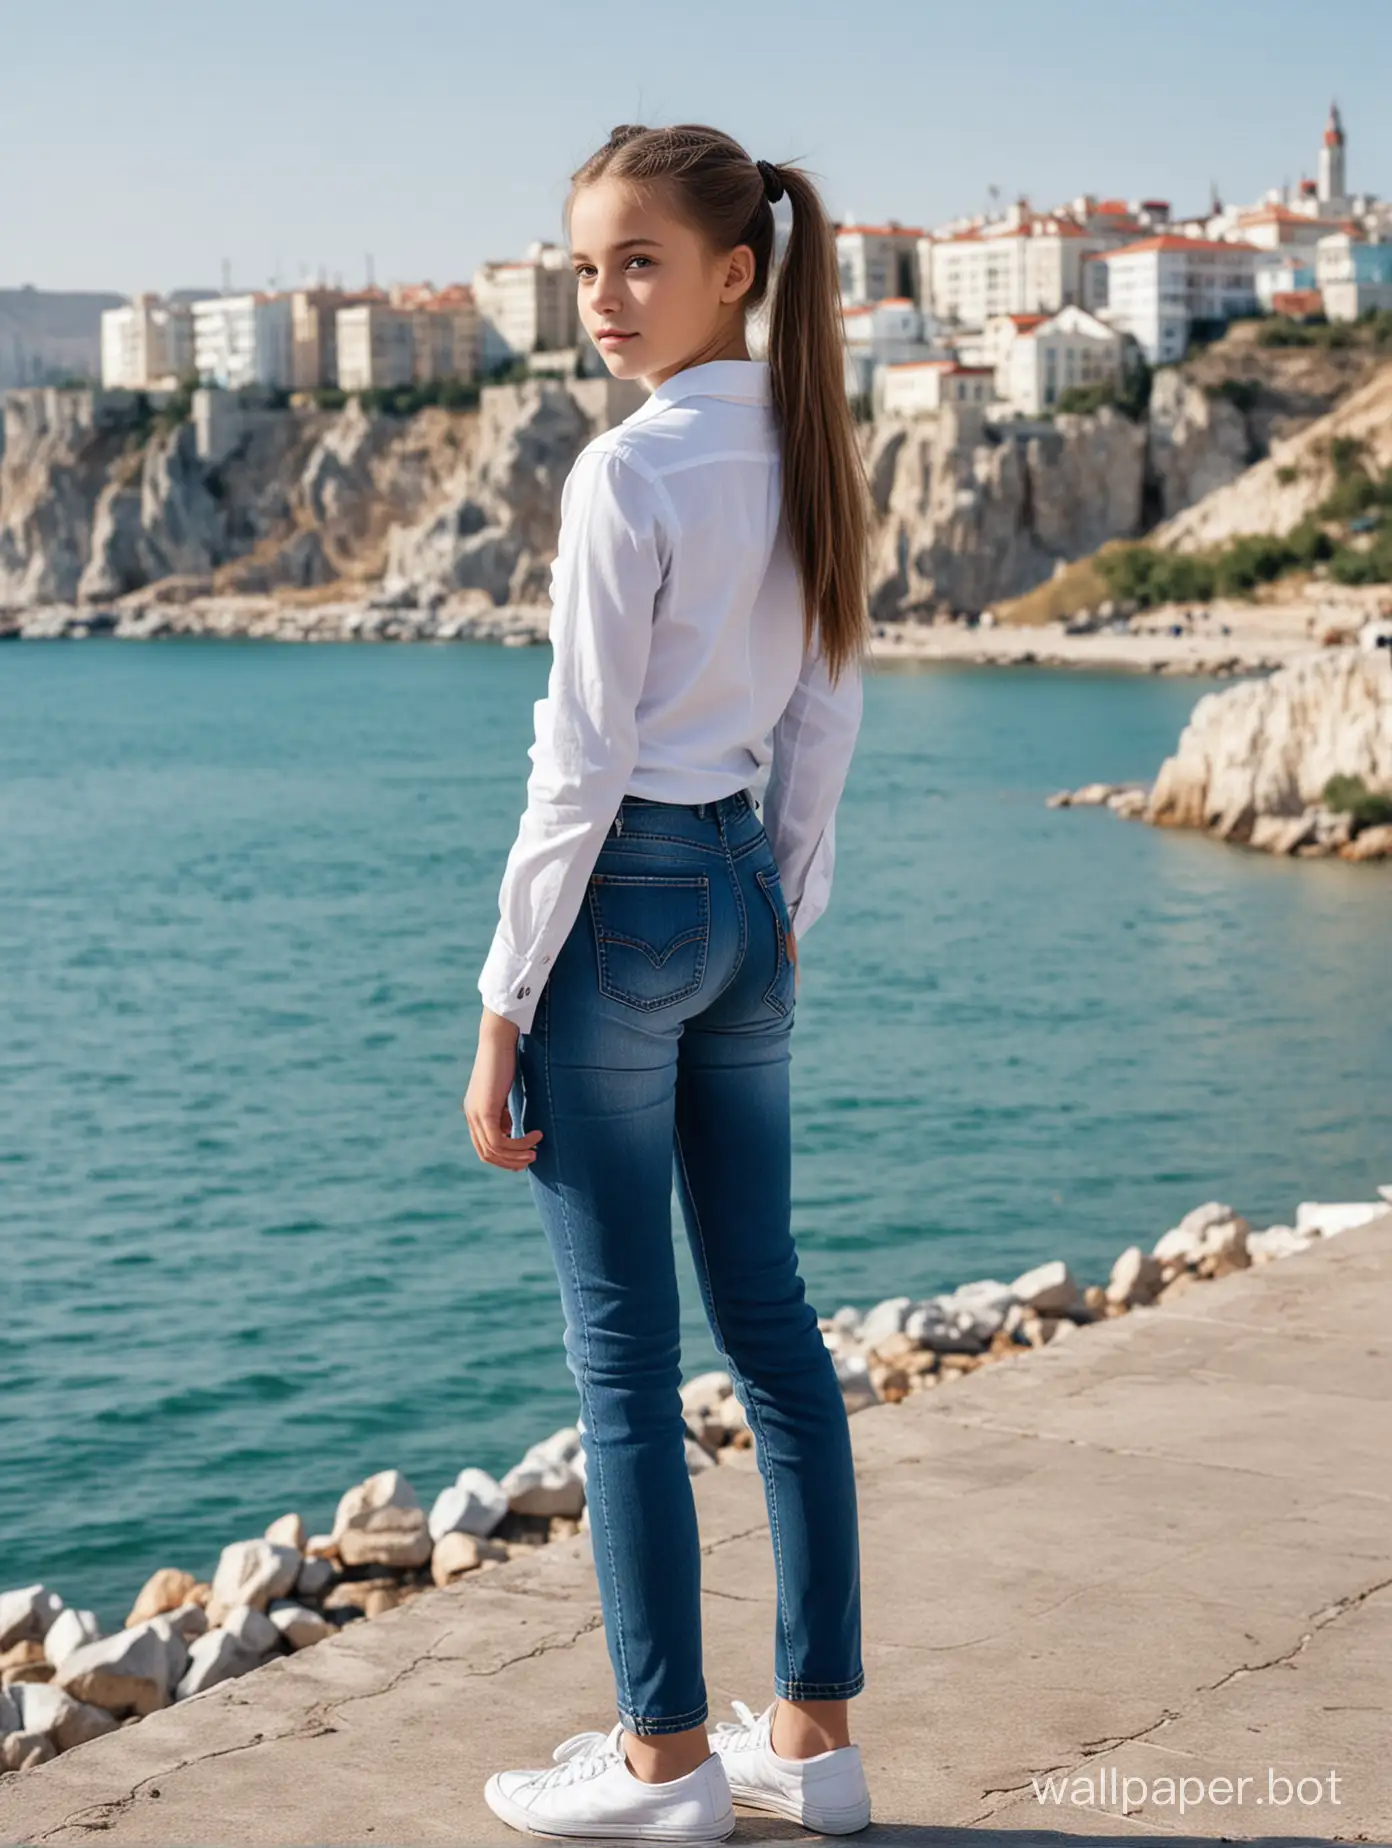 Beautiful Soviet schoolgirl 10 years old with ponytails in Crimea against the background of the sea, full height, dynamic poses, people and buildings in the background, tight jeans, ass, rear view